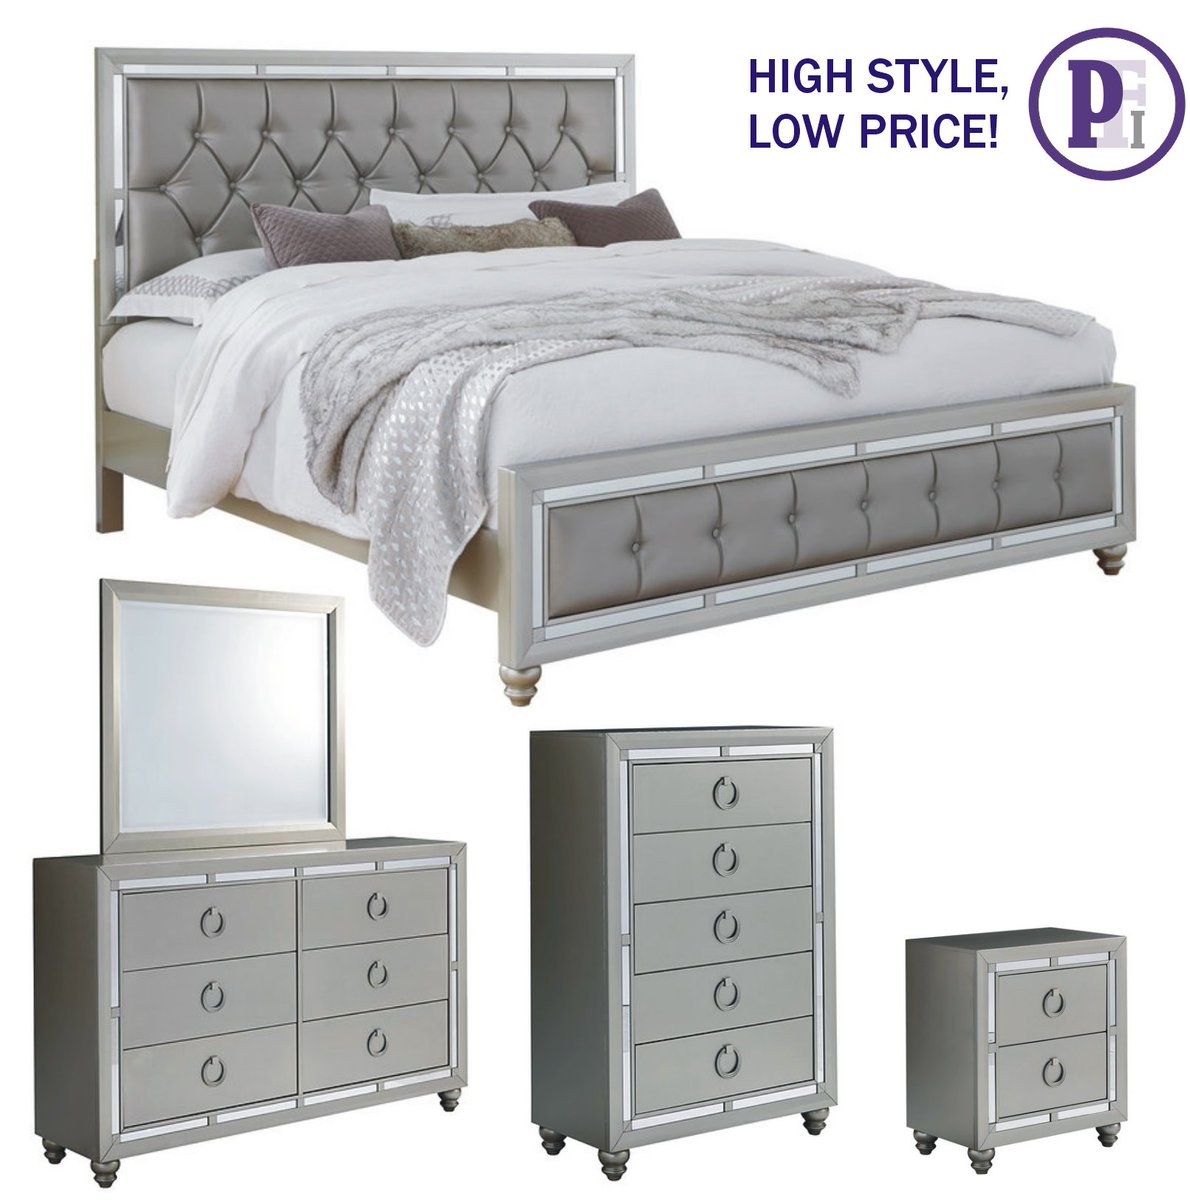 The stunning Luna Bedroom set puts a contemporary spin on old-world style. 
#parliamentfurniture #furniture #modernfurniture #classicfurniture #storagebench #benchstorage #bedroom #bedroomstorage #lounge #loungestorage #homedecor #officedecor #cabbagetown #toronto #thesix